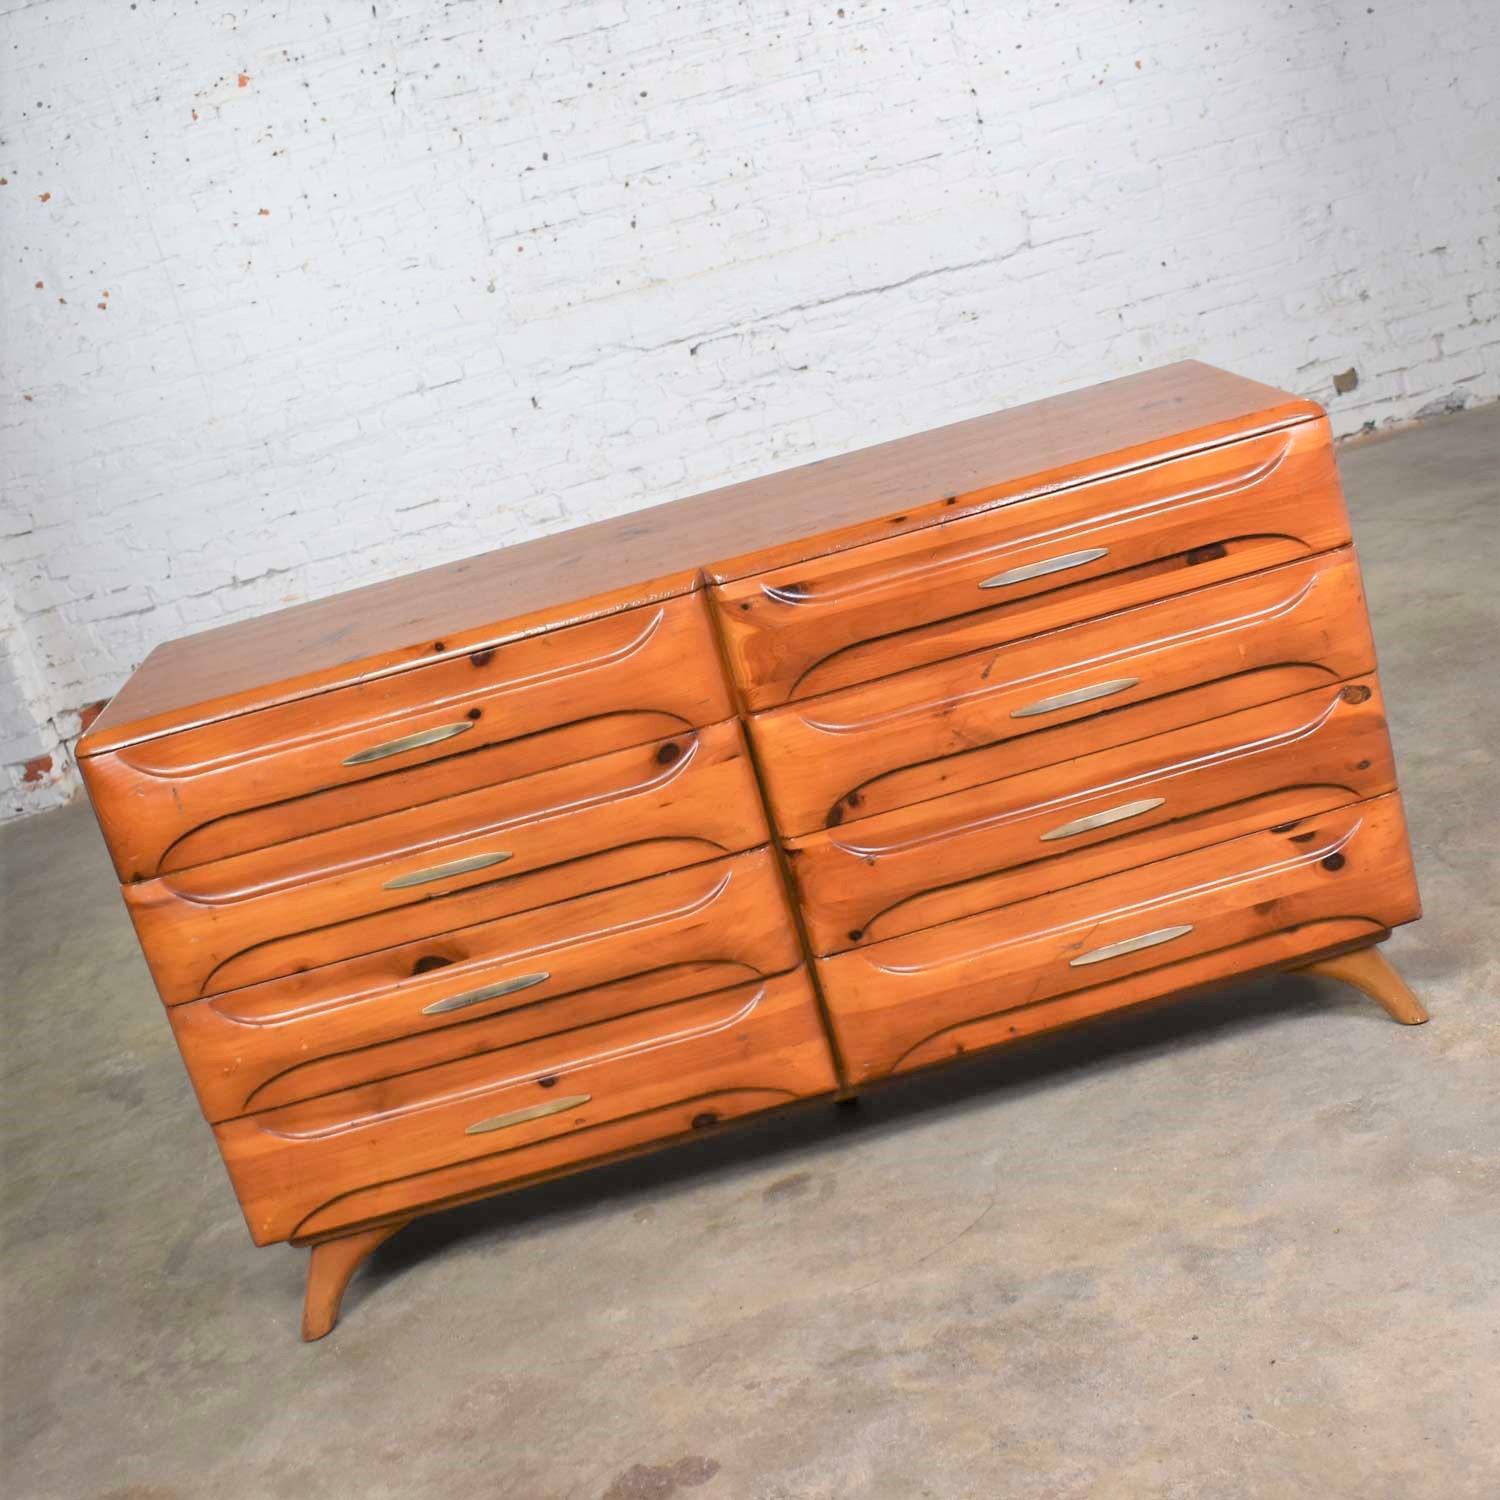 Handsome Mid-Century Modern low double dresser or credenza by Franklin Shockey Furniture from their Sculpted Pine Collection. In wonderful vintage condition with a beautiful age patina. We have not refinished this piece but restored with some touch